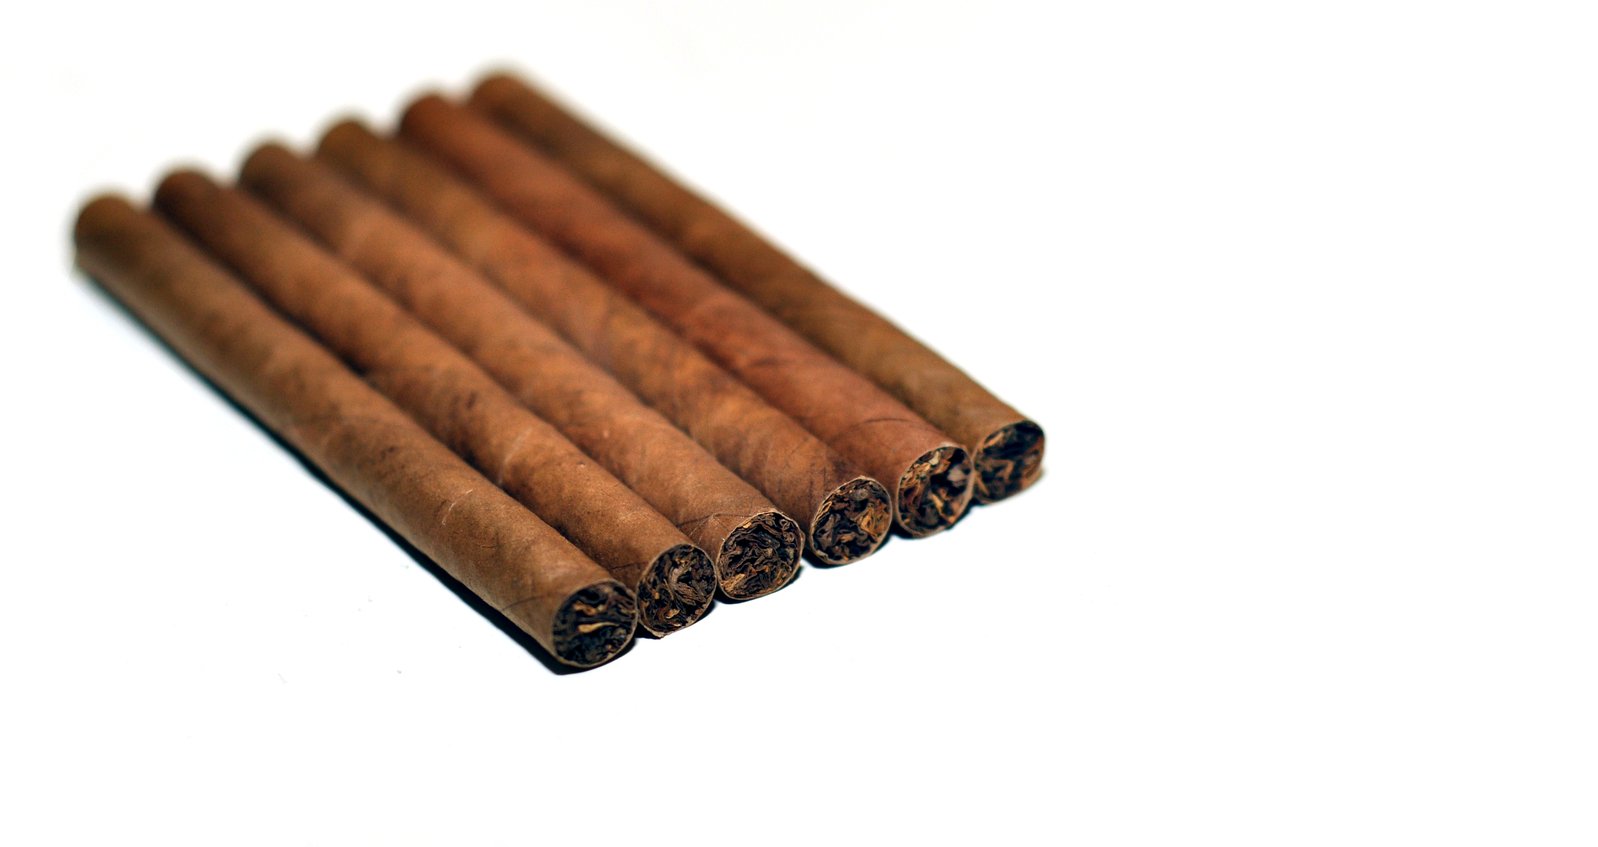 How Long can Cigars Last in Storage?